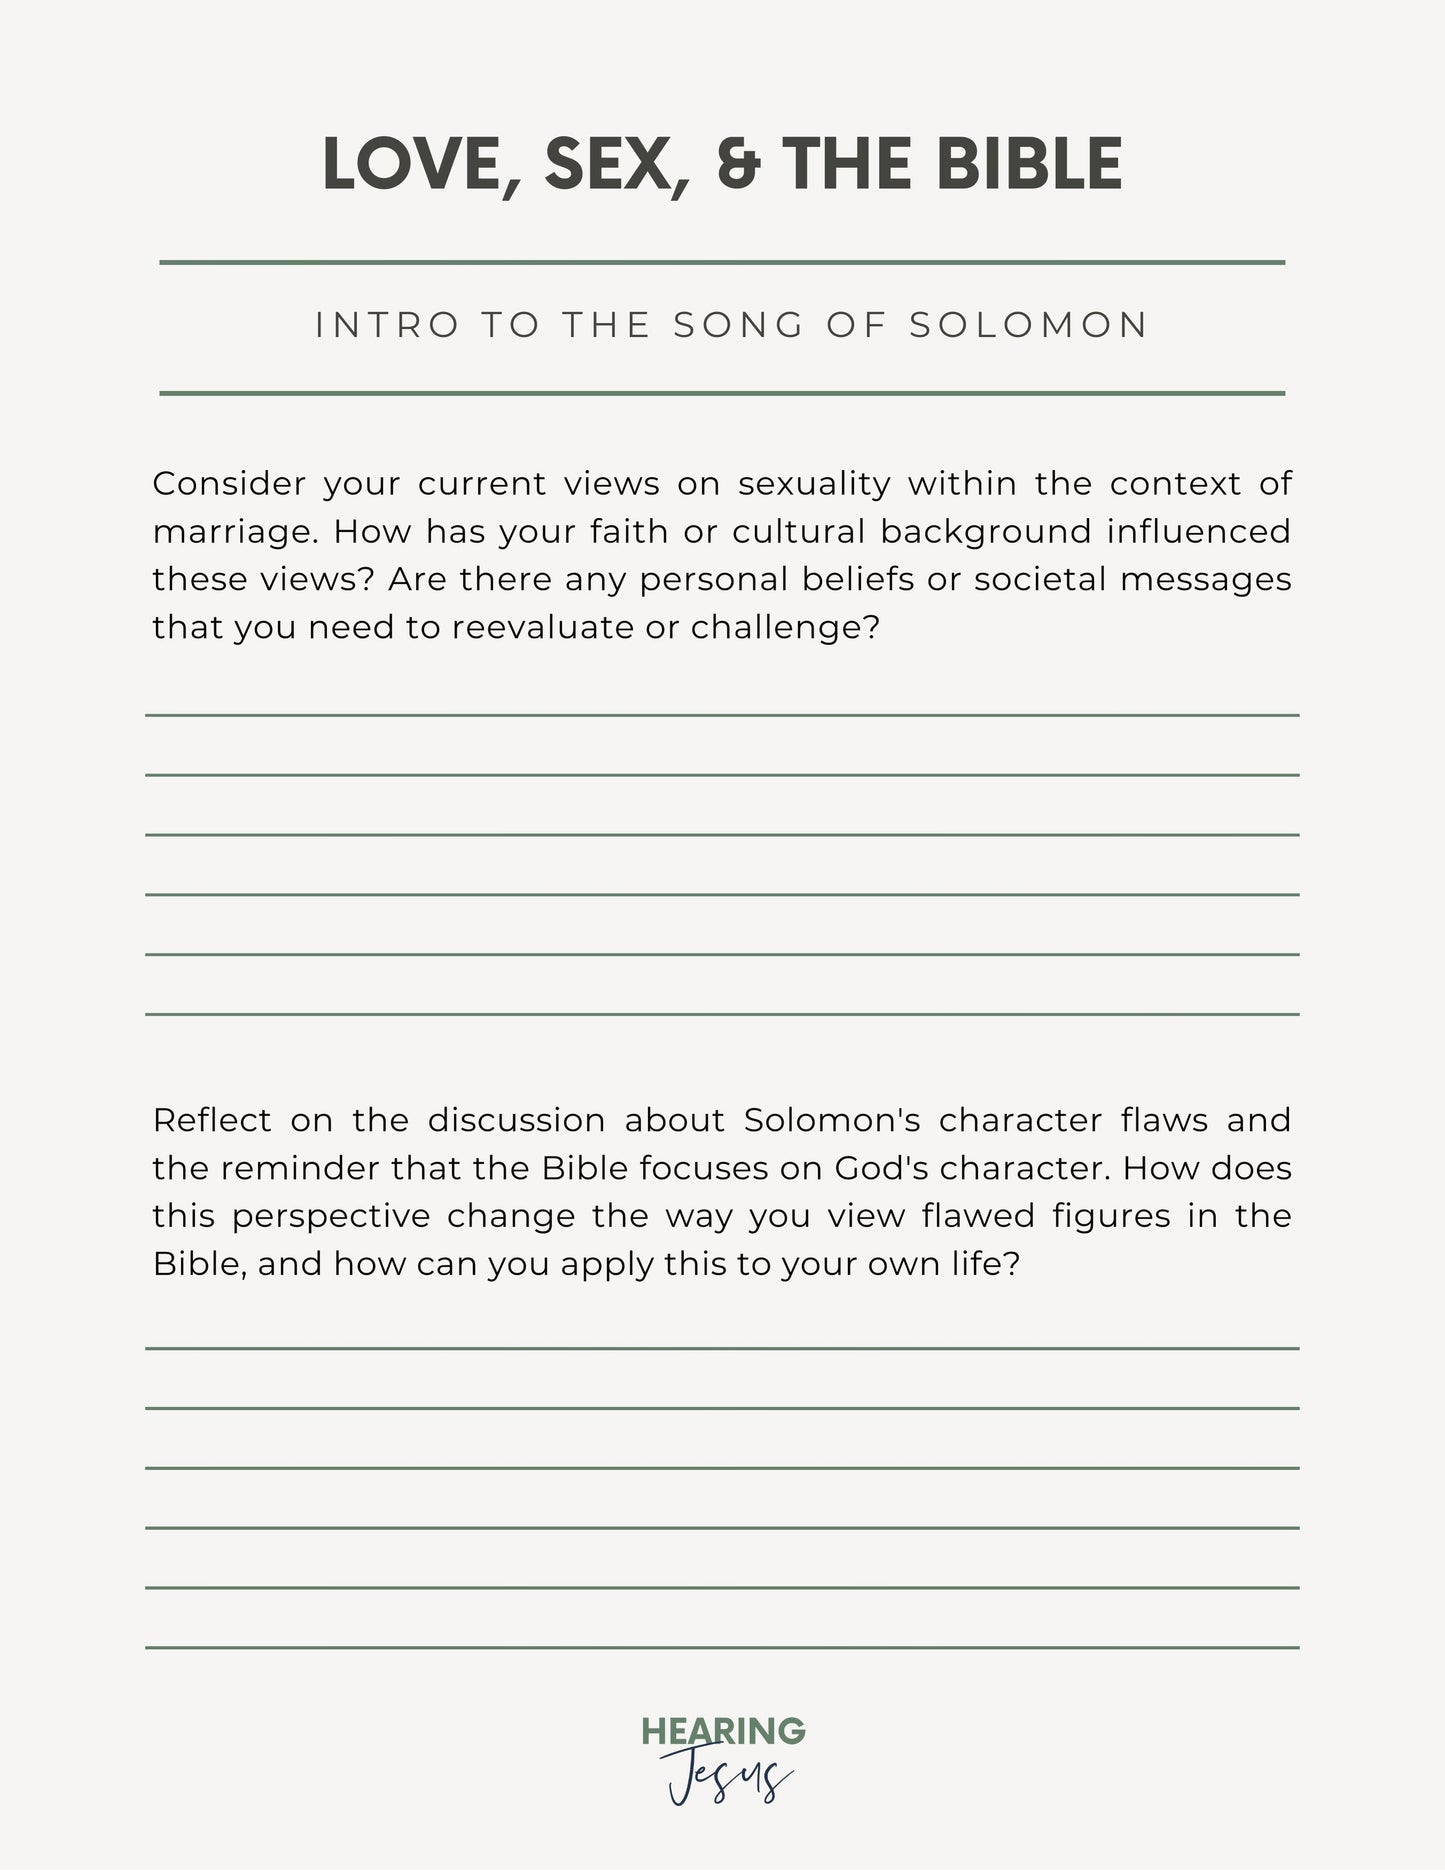 Love, Sex, and the Bible: Song of Solomon Guided Journal